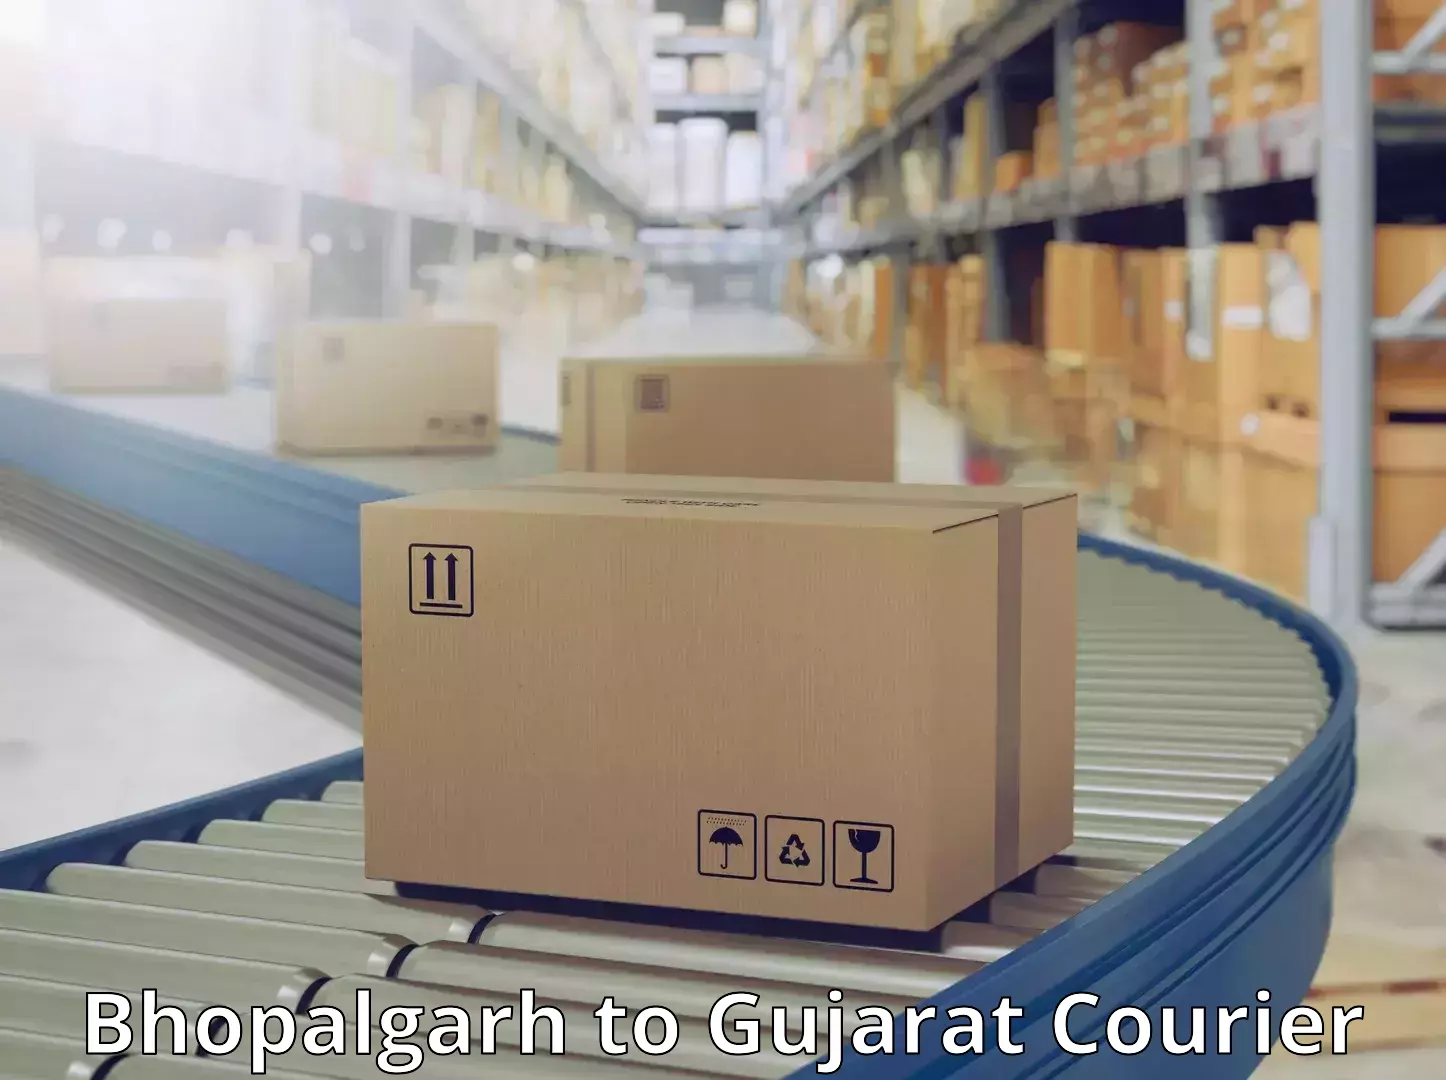 Global logistics network Bhopalgarh to Anand Agricultural University